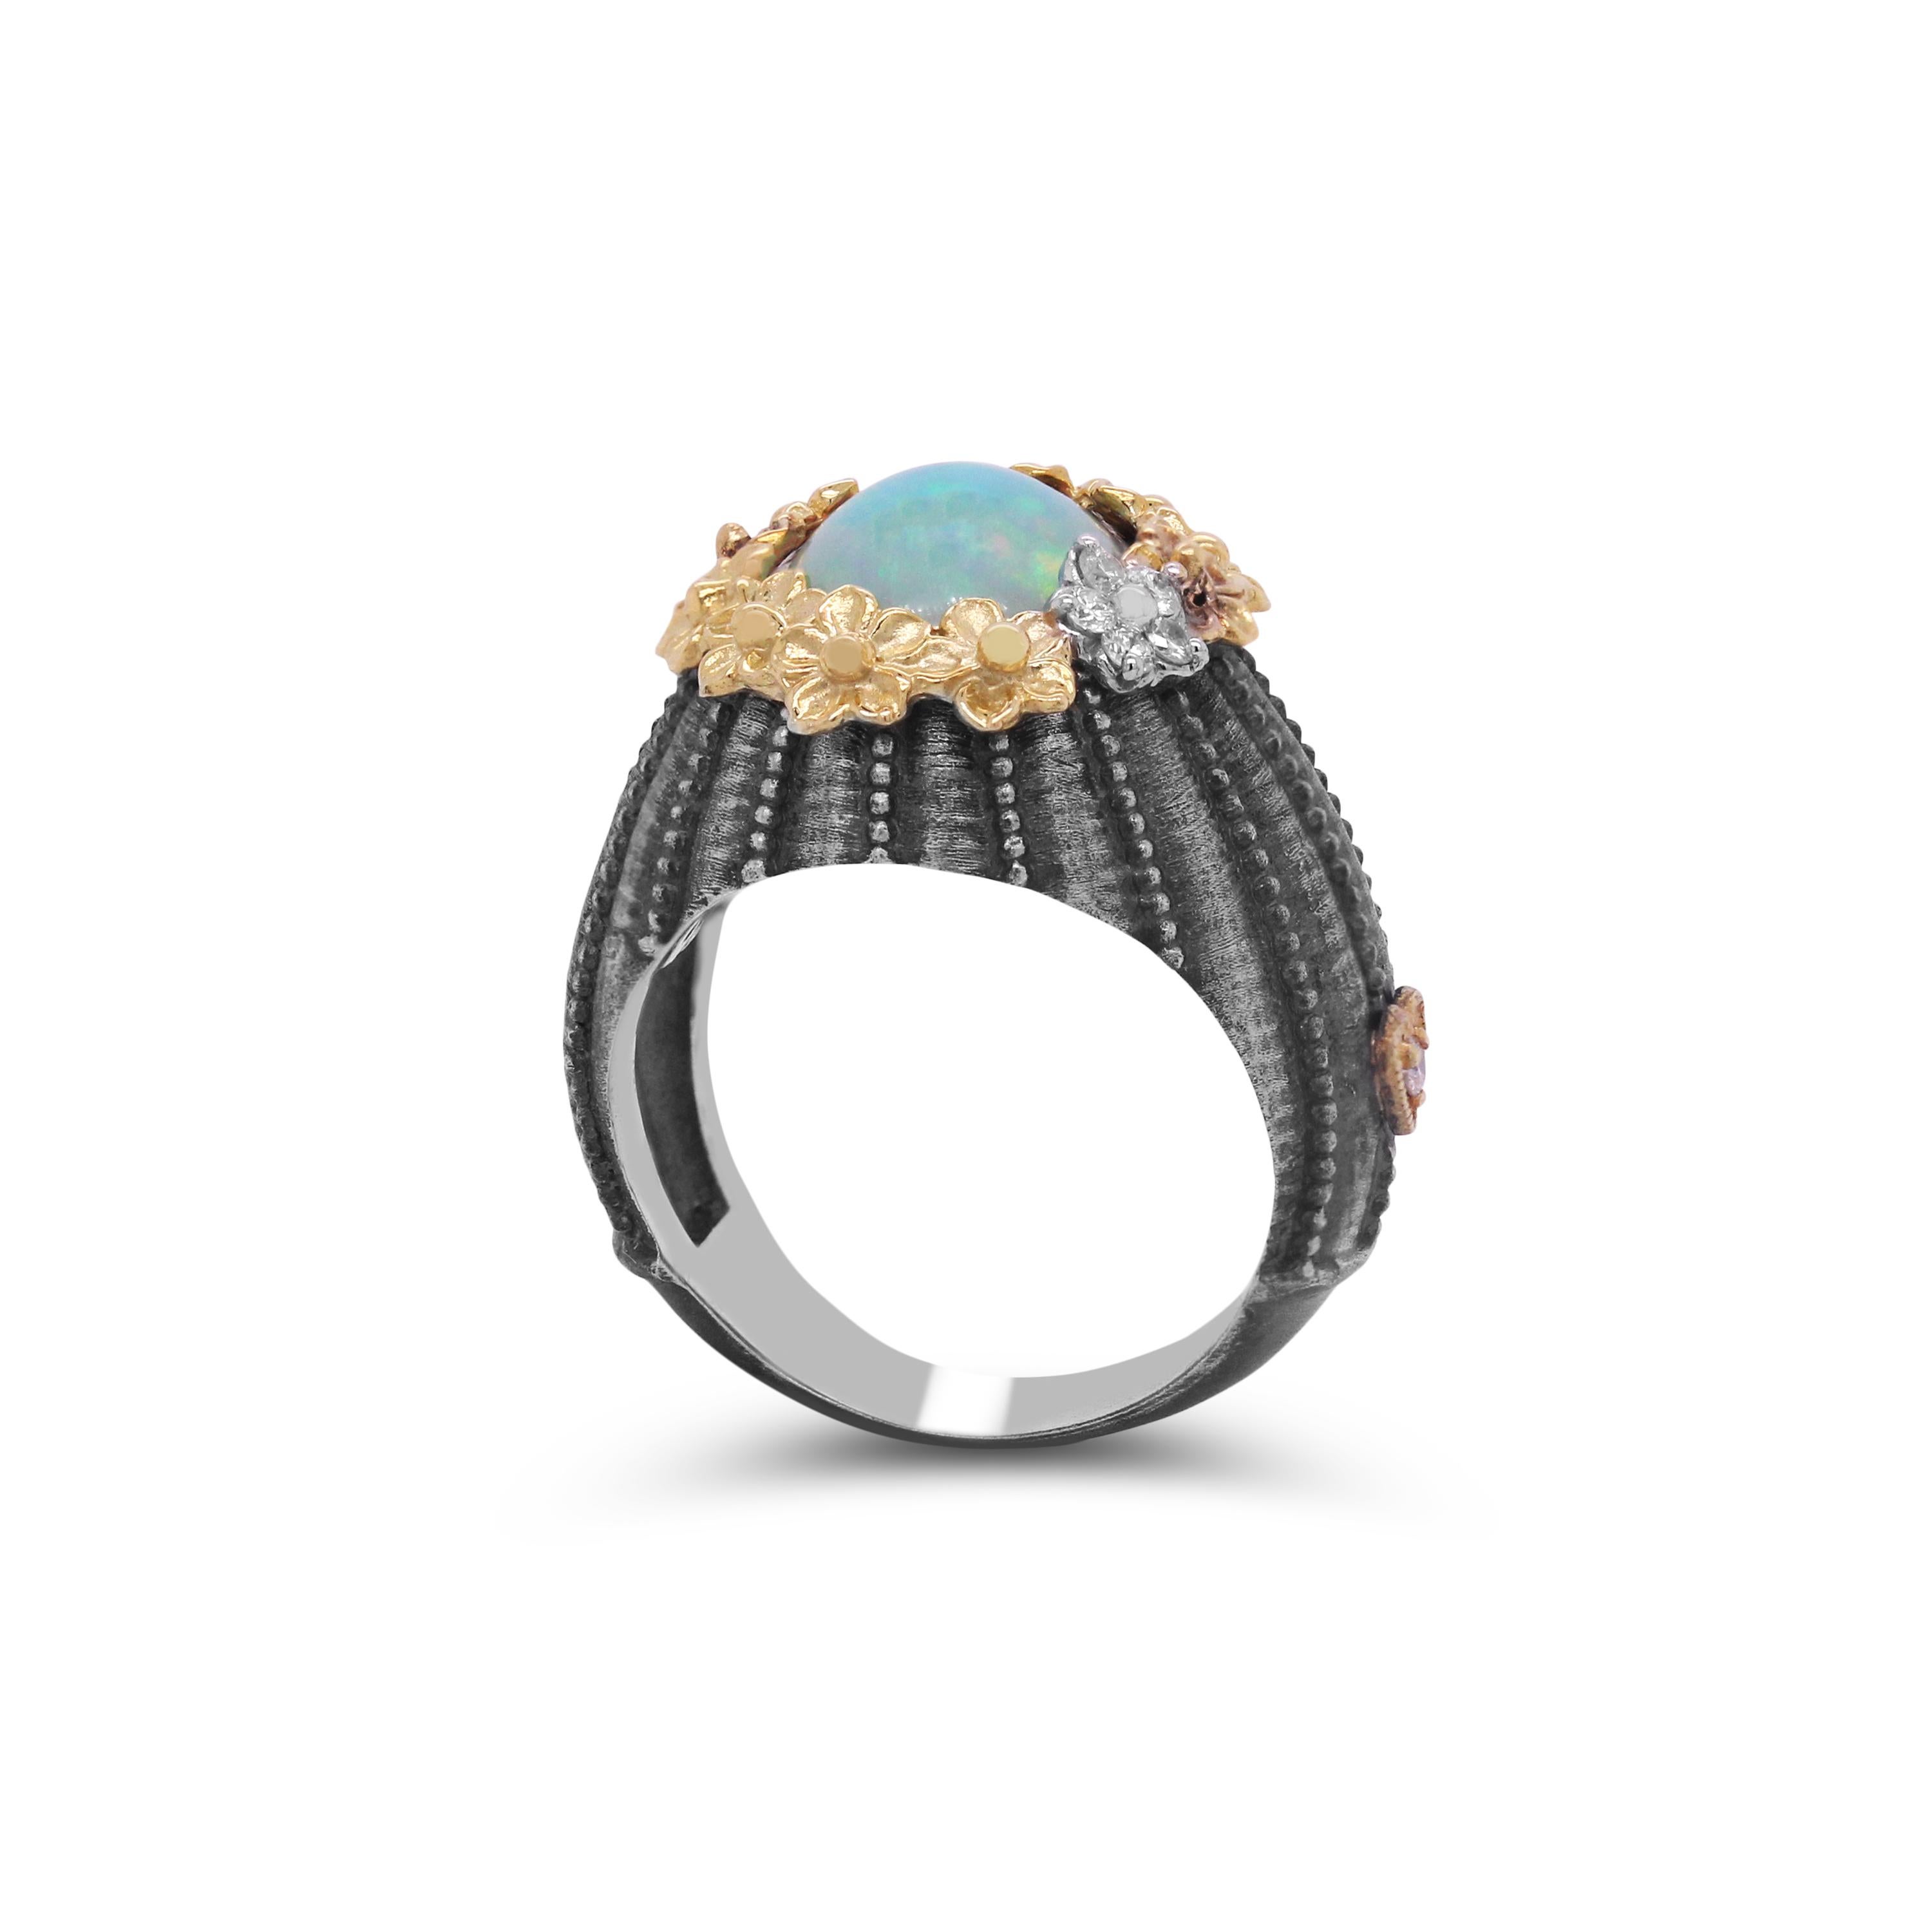 Aged Sterling Silver & 18K Gold Floral Ring with Ethiopian Opal center and Diamonds by Stambolian

This ring from the Stambolian 